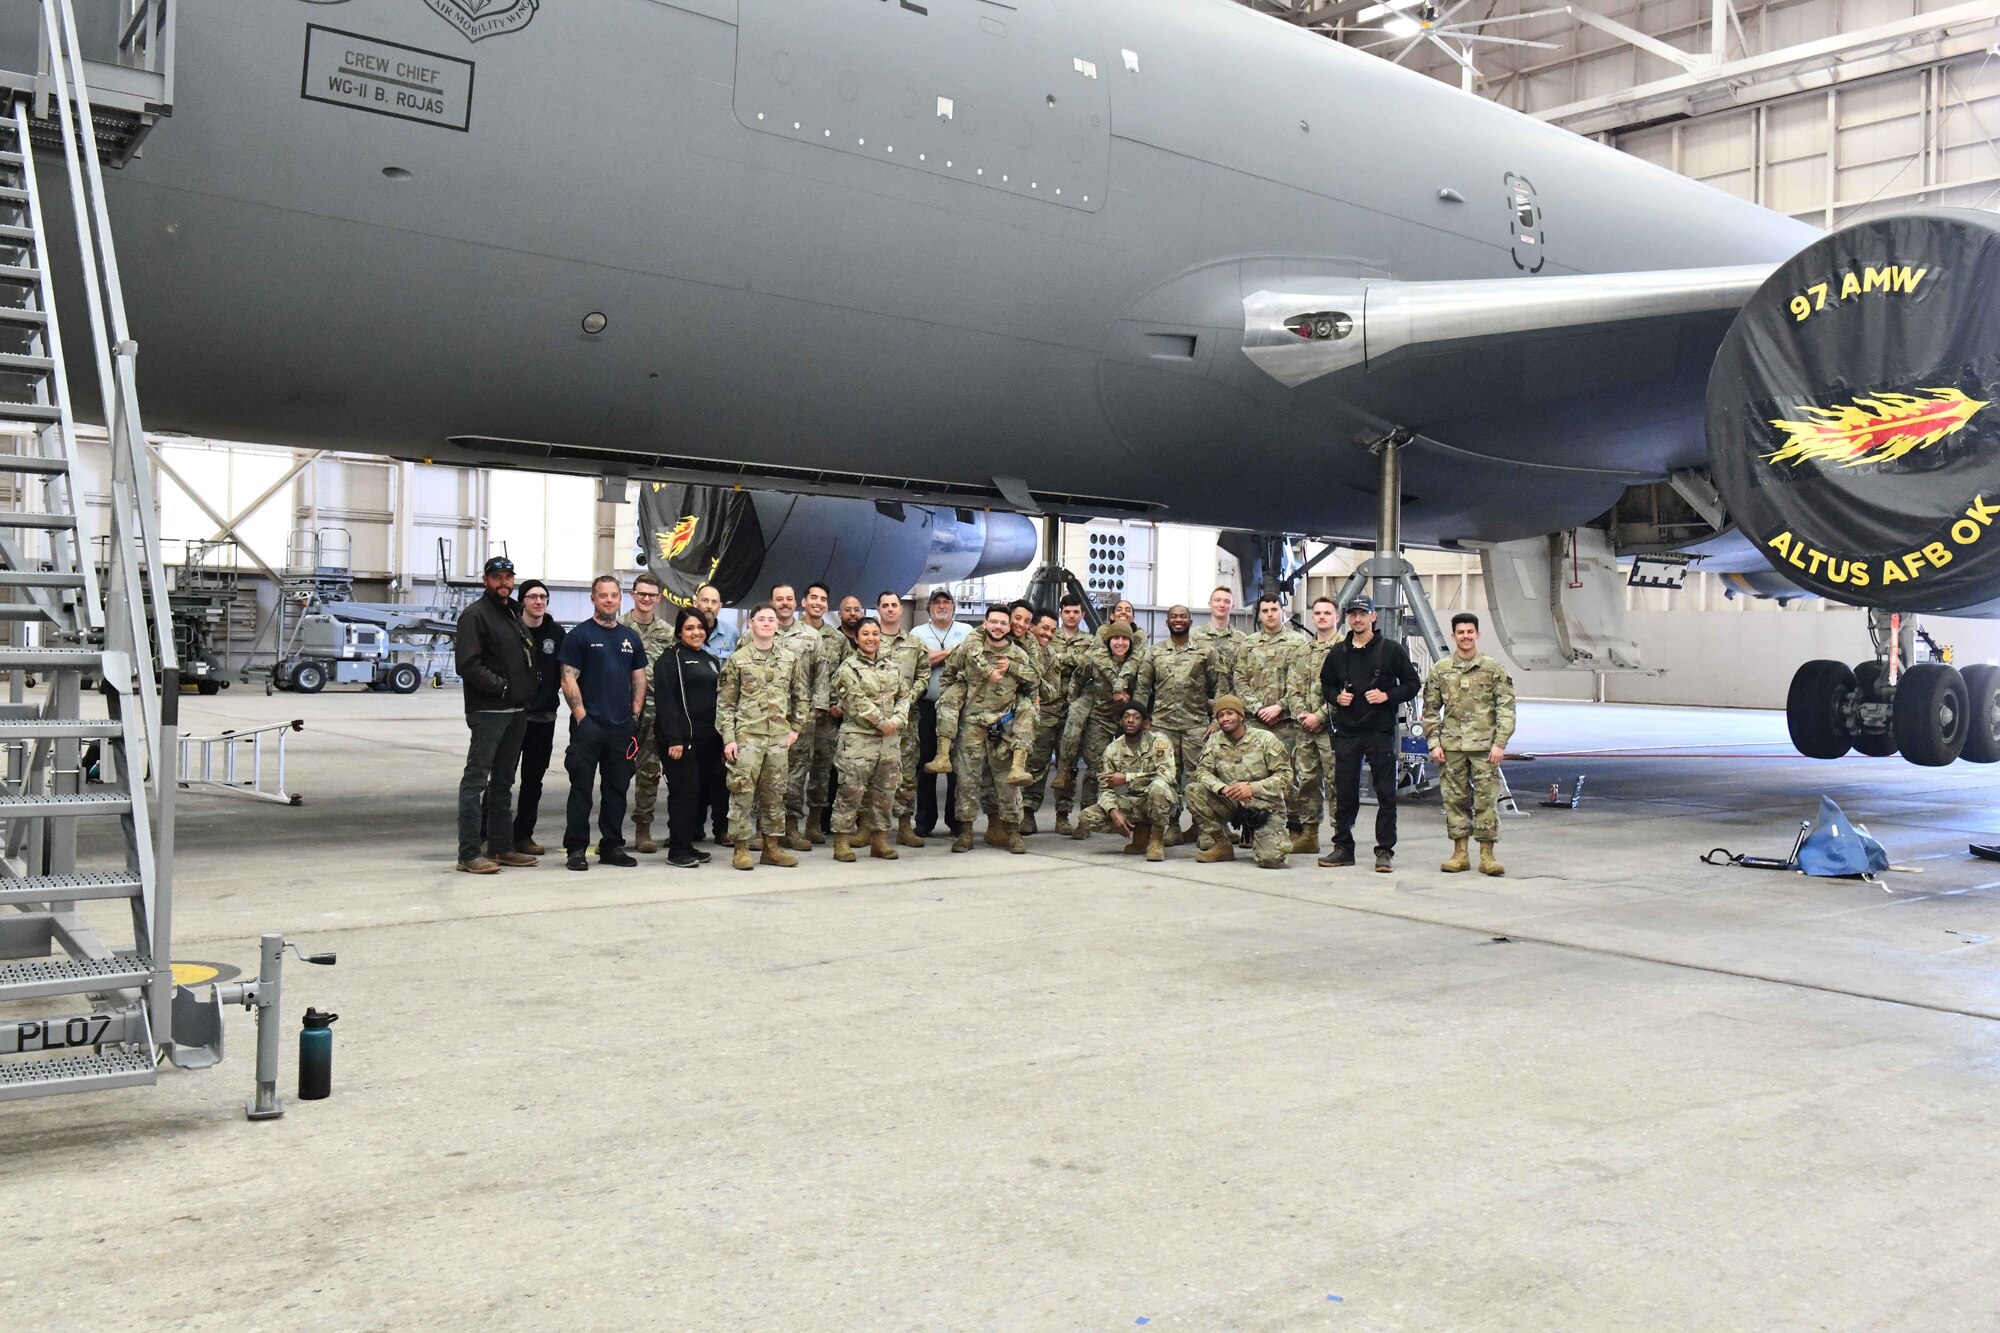 Airmen from the 97th Aircraft Maintenance Squadron (AMXS) at Altus Air Force Base (AFB), Oklahoma and the 660th AMXS at Travis Air Force Base, Calif., pose in front of a suspended KC-46 Pegasus at Altus AFB, April 18, 2023. Members of the 97th AMXS trained maintainers from Travis on the KC-46 from February to May 2023. (U.S. Air Force photo by Airman 1st Class Miyah Gray)